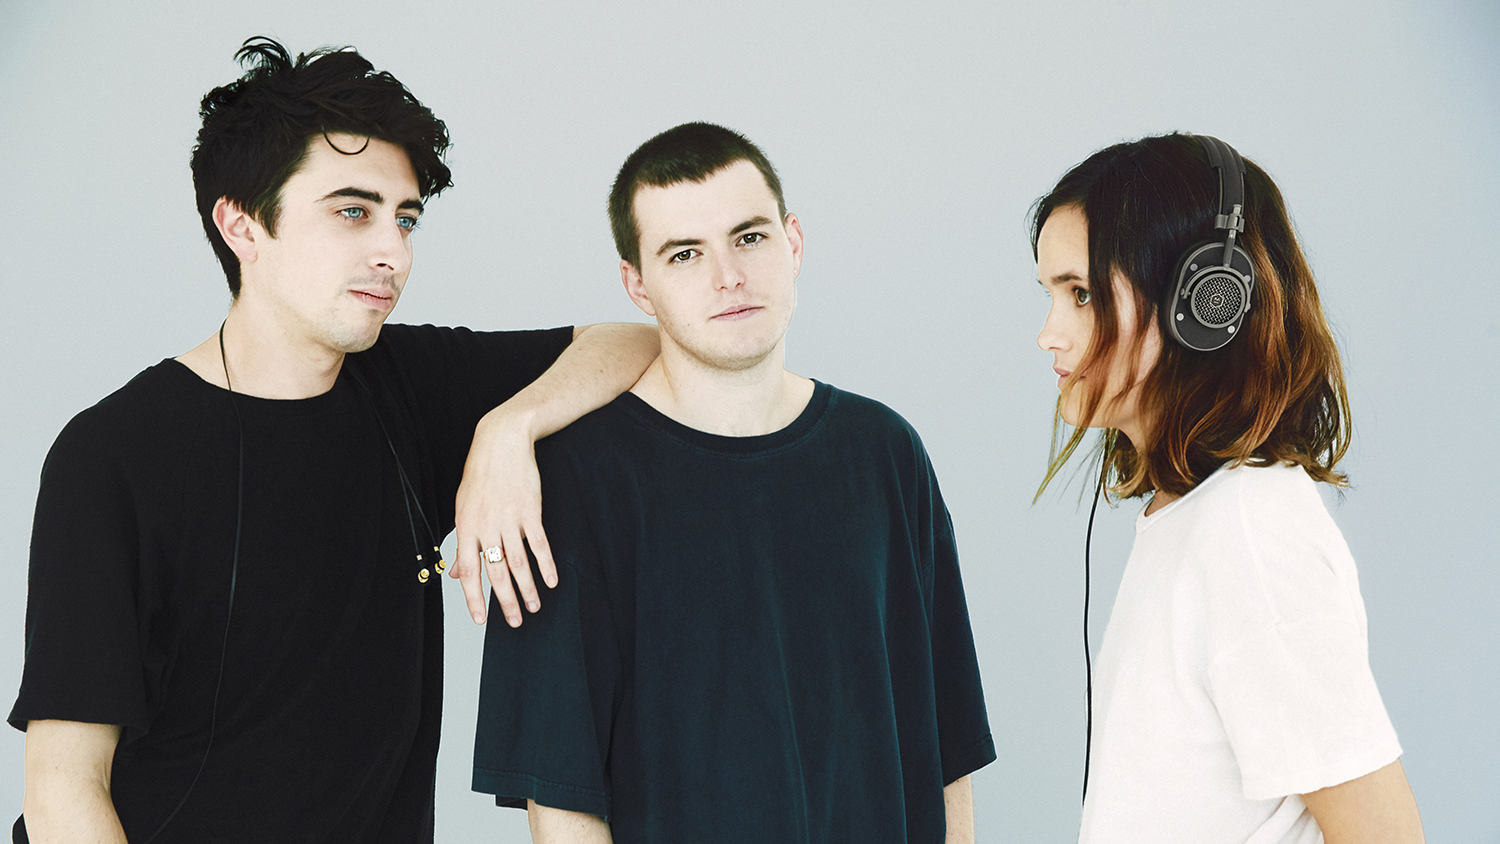 Wet: The Brooklyn-Based Alt-Pop Trio Staying Calm in the Face of Rising Fame